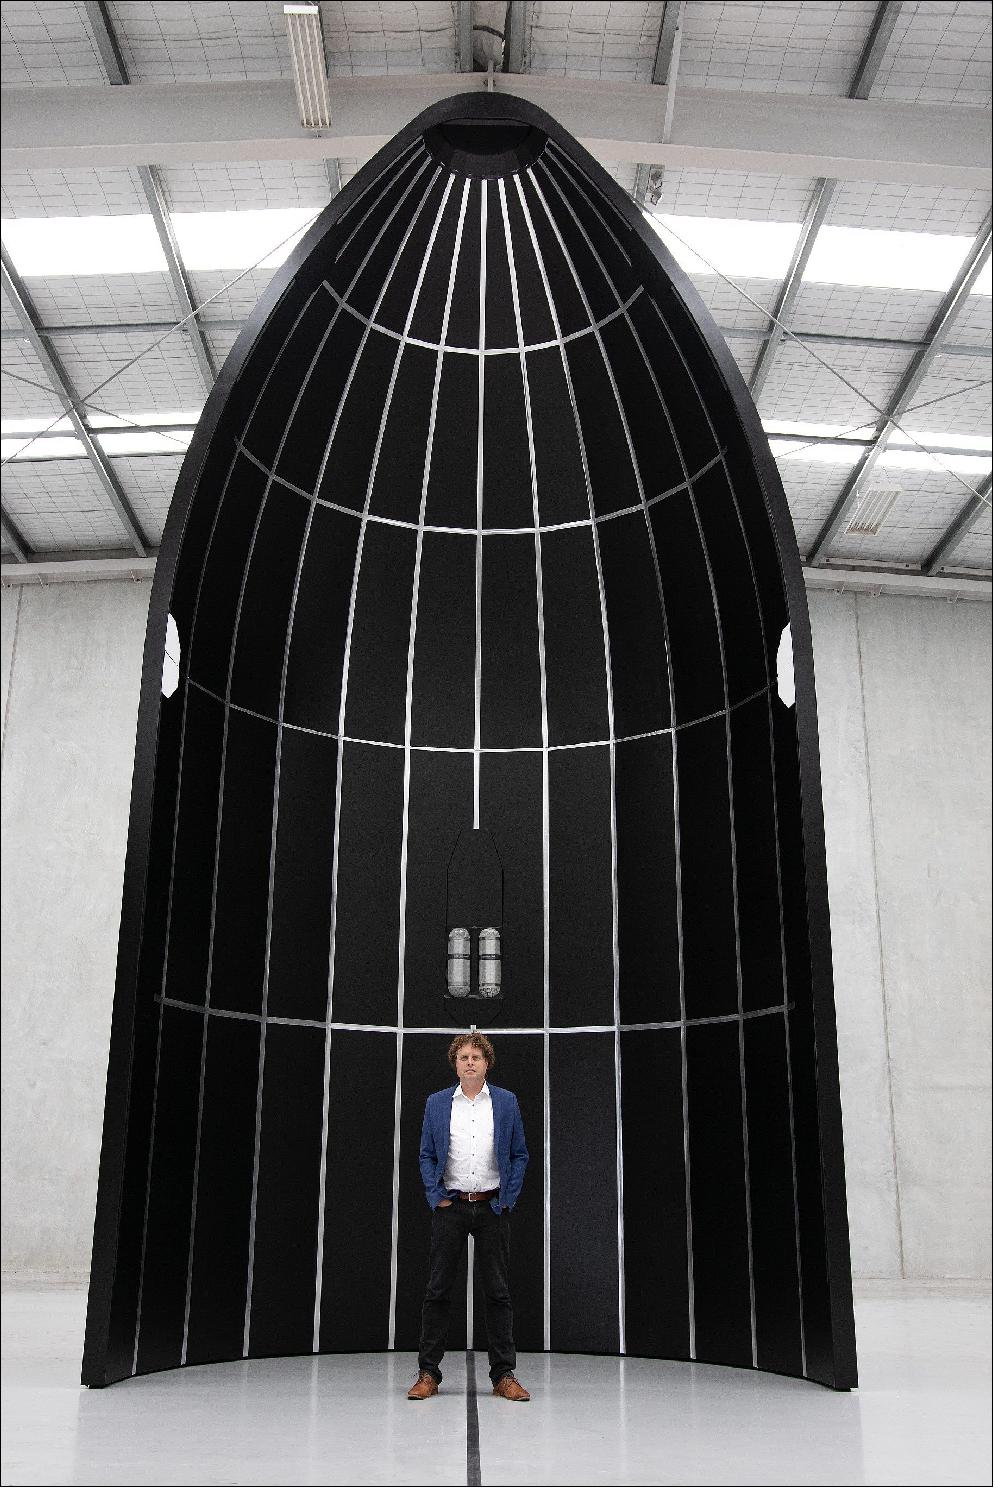 Figure 23: Rocket Lab CEO Peter Beck and Neutron. Neutron will build on Rocket Lab’s proven experience developing the reliable workhorse Electron launch vehicle, the second most frequently launched U.S. rocket annually since 2019. Where Electron provides dedicated access to orbit for small satellites of up to 300 kg (660 lb), Neutron will transform space access for satellite constellations and provide a dependable, high-flight-rate dedicated launch solution for larger commercial and government payloads (photo: Business Wire)